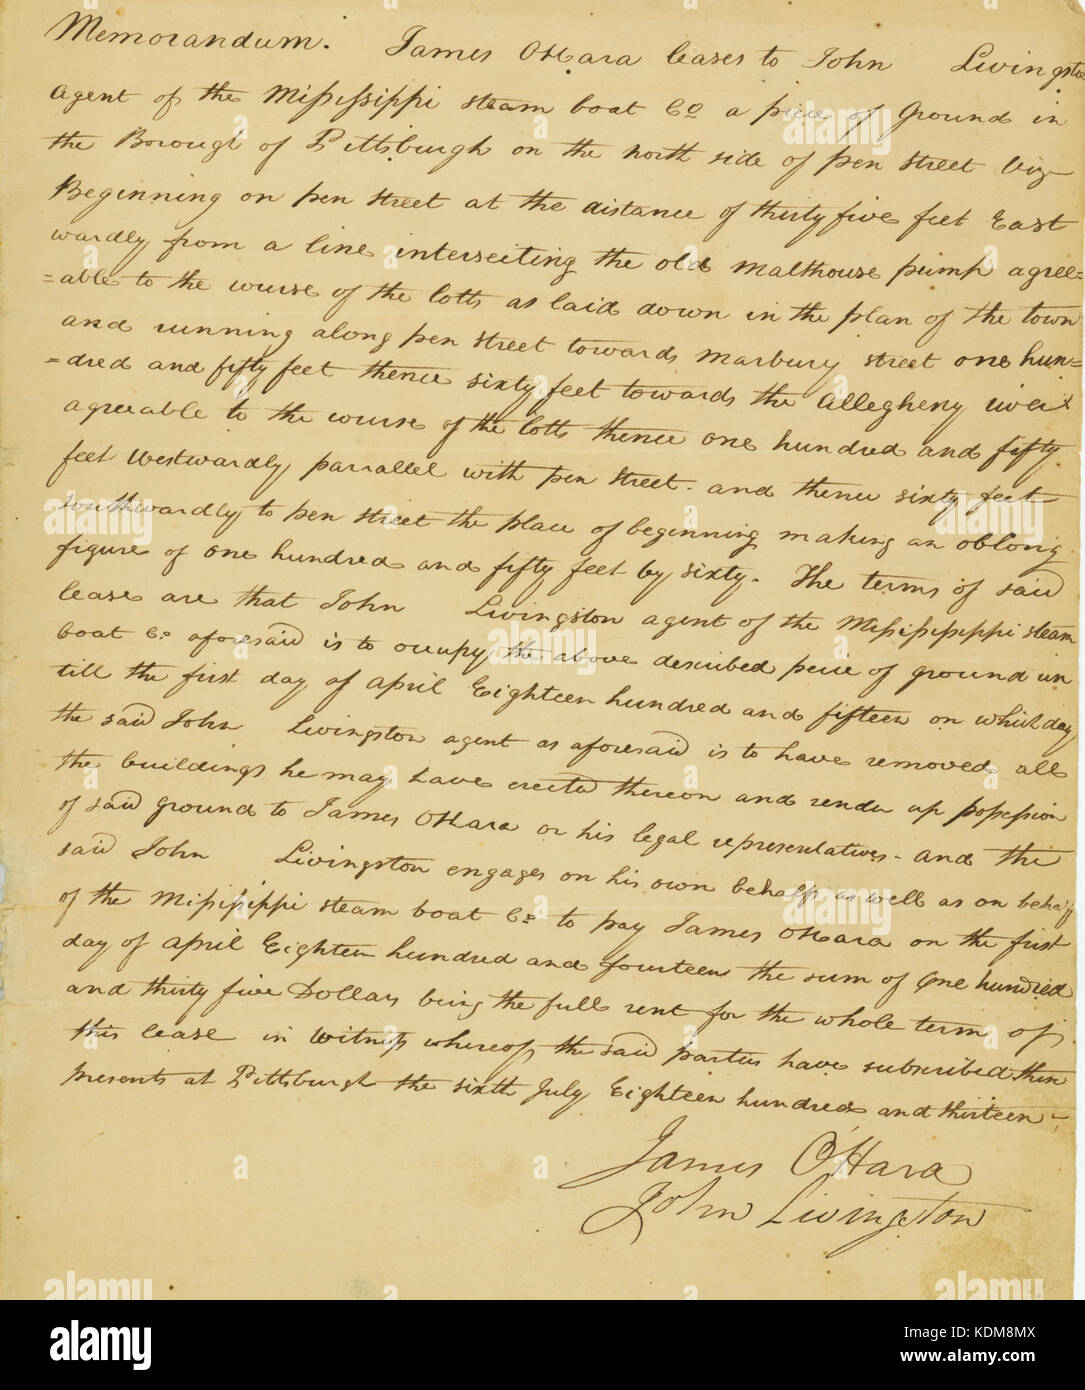 Memorandum of agreement between James O'Hara and John Livingston, agent of the Mississippi Steamboat Company, July 6, 1813 Stock Photo